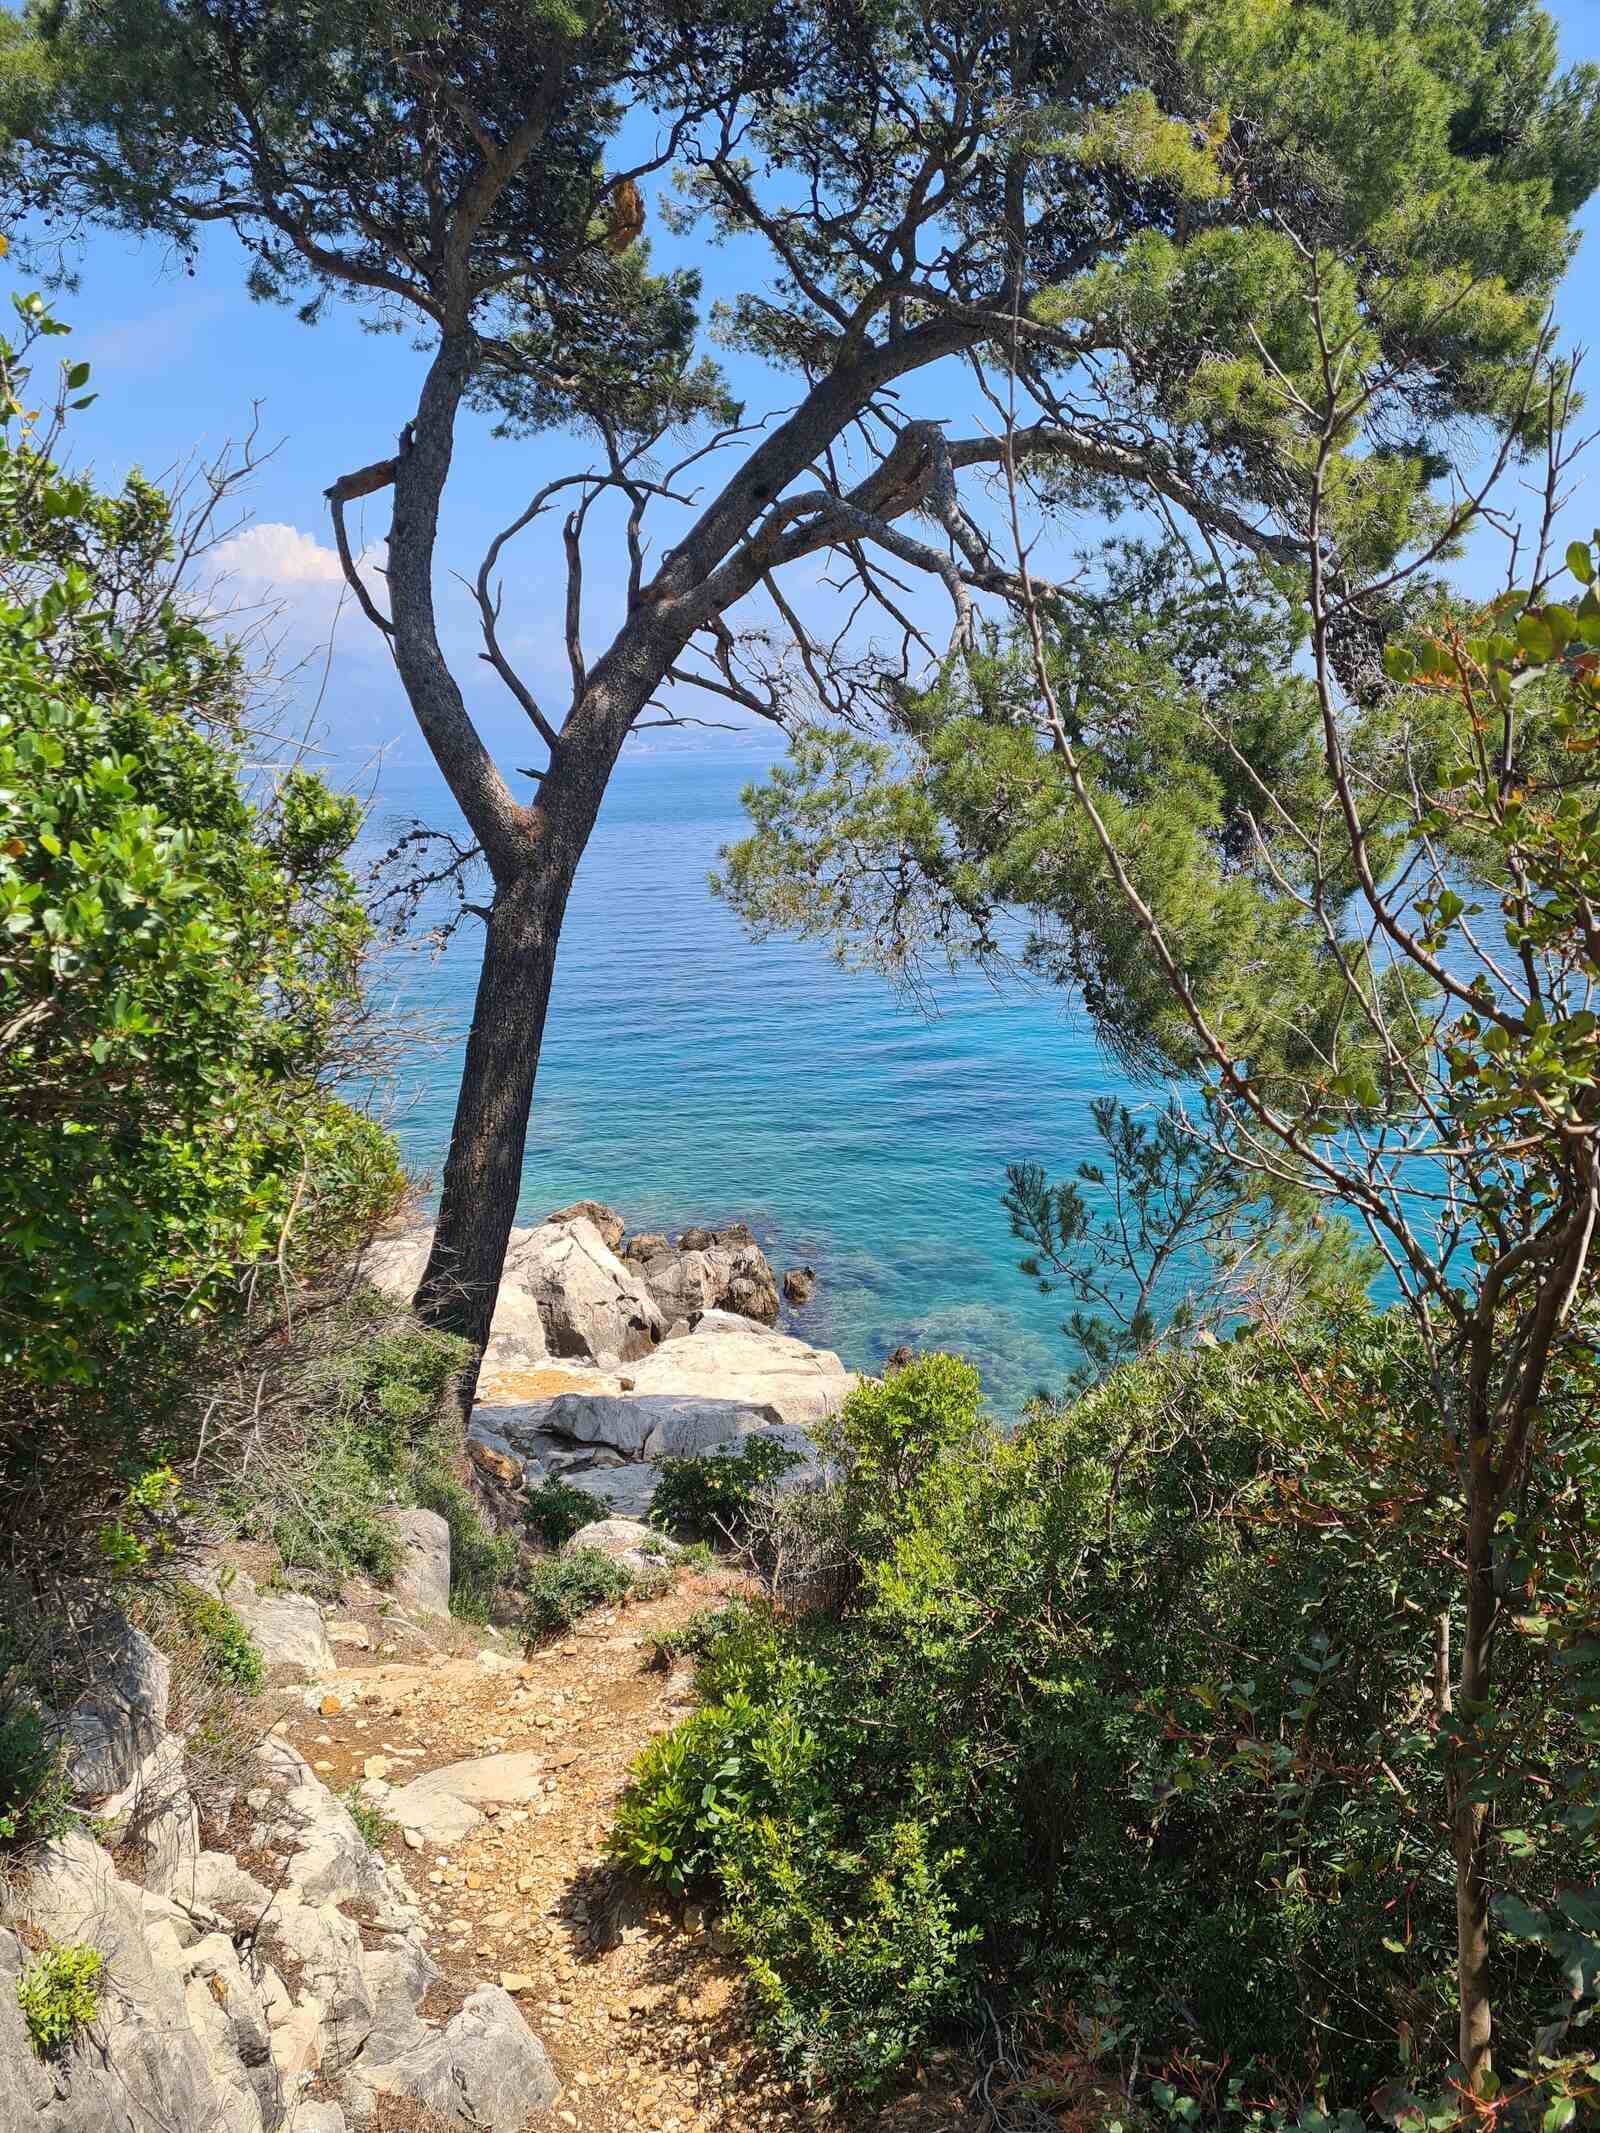 a small rocky beach between the trees with turquoise blue sea